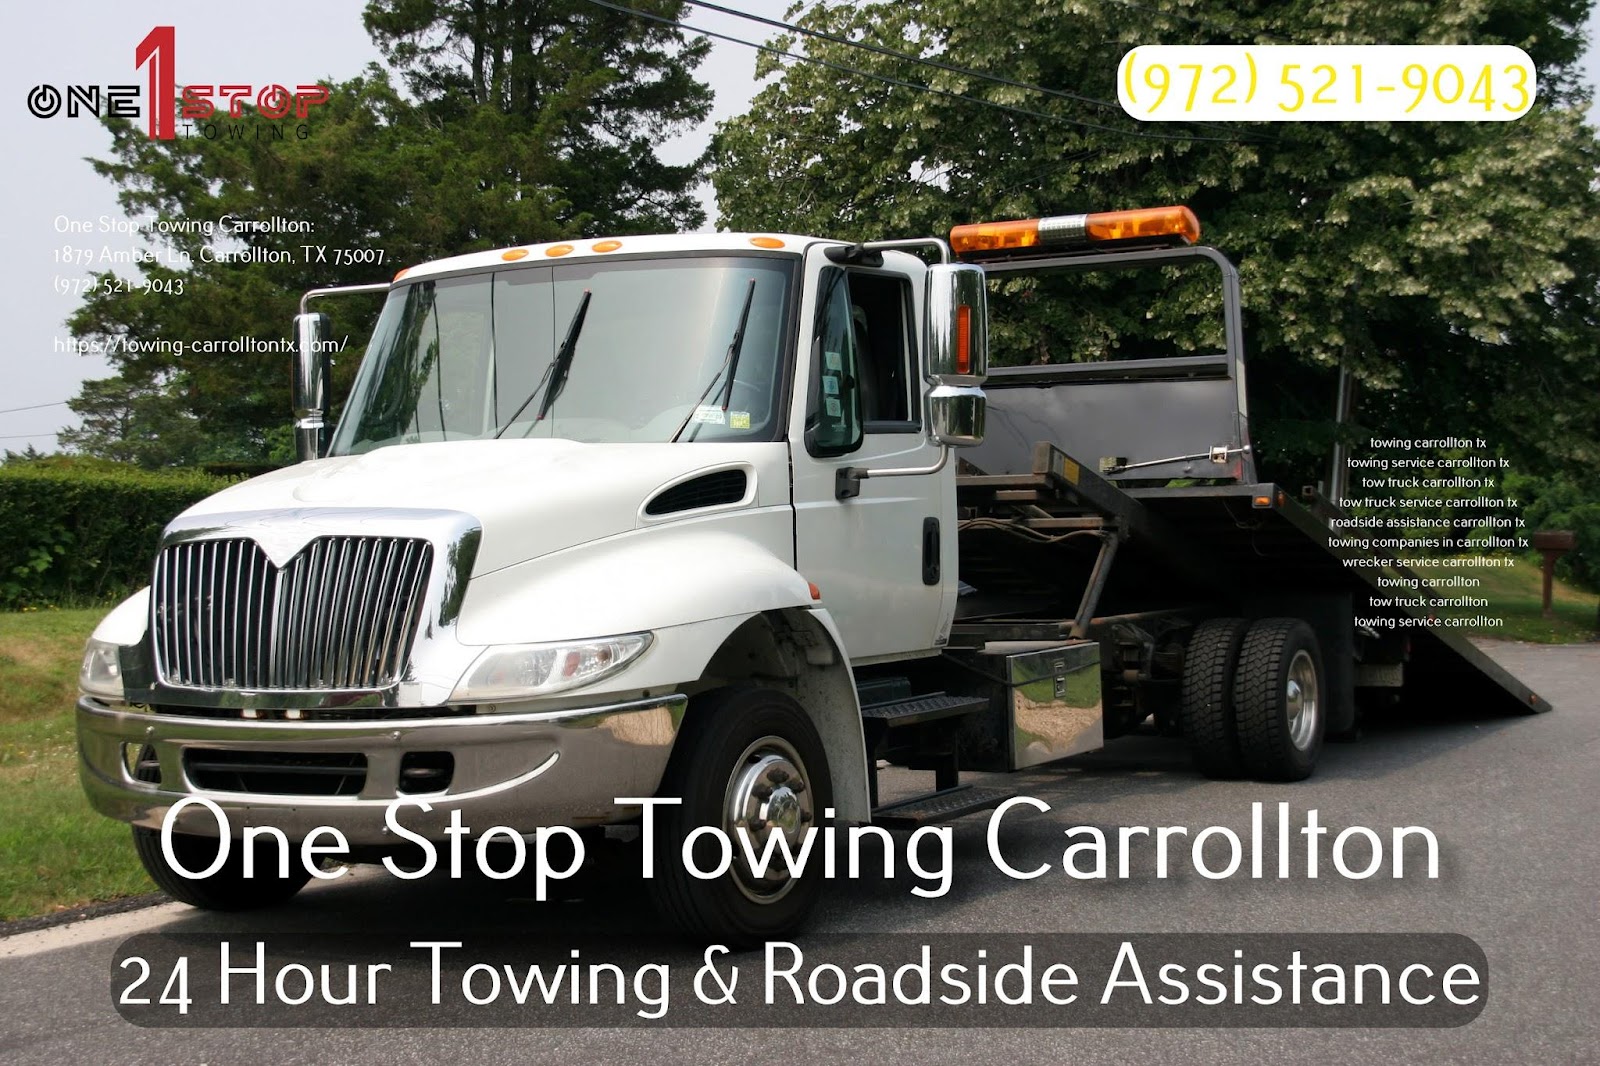 One Stop Towing Carrollton provides professional towing services in Carrollton, TX.